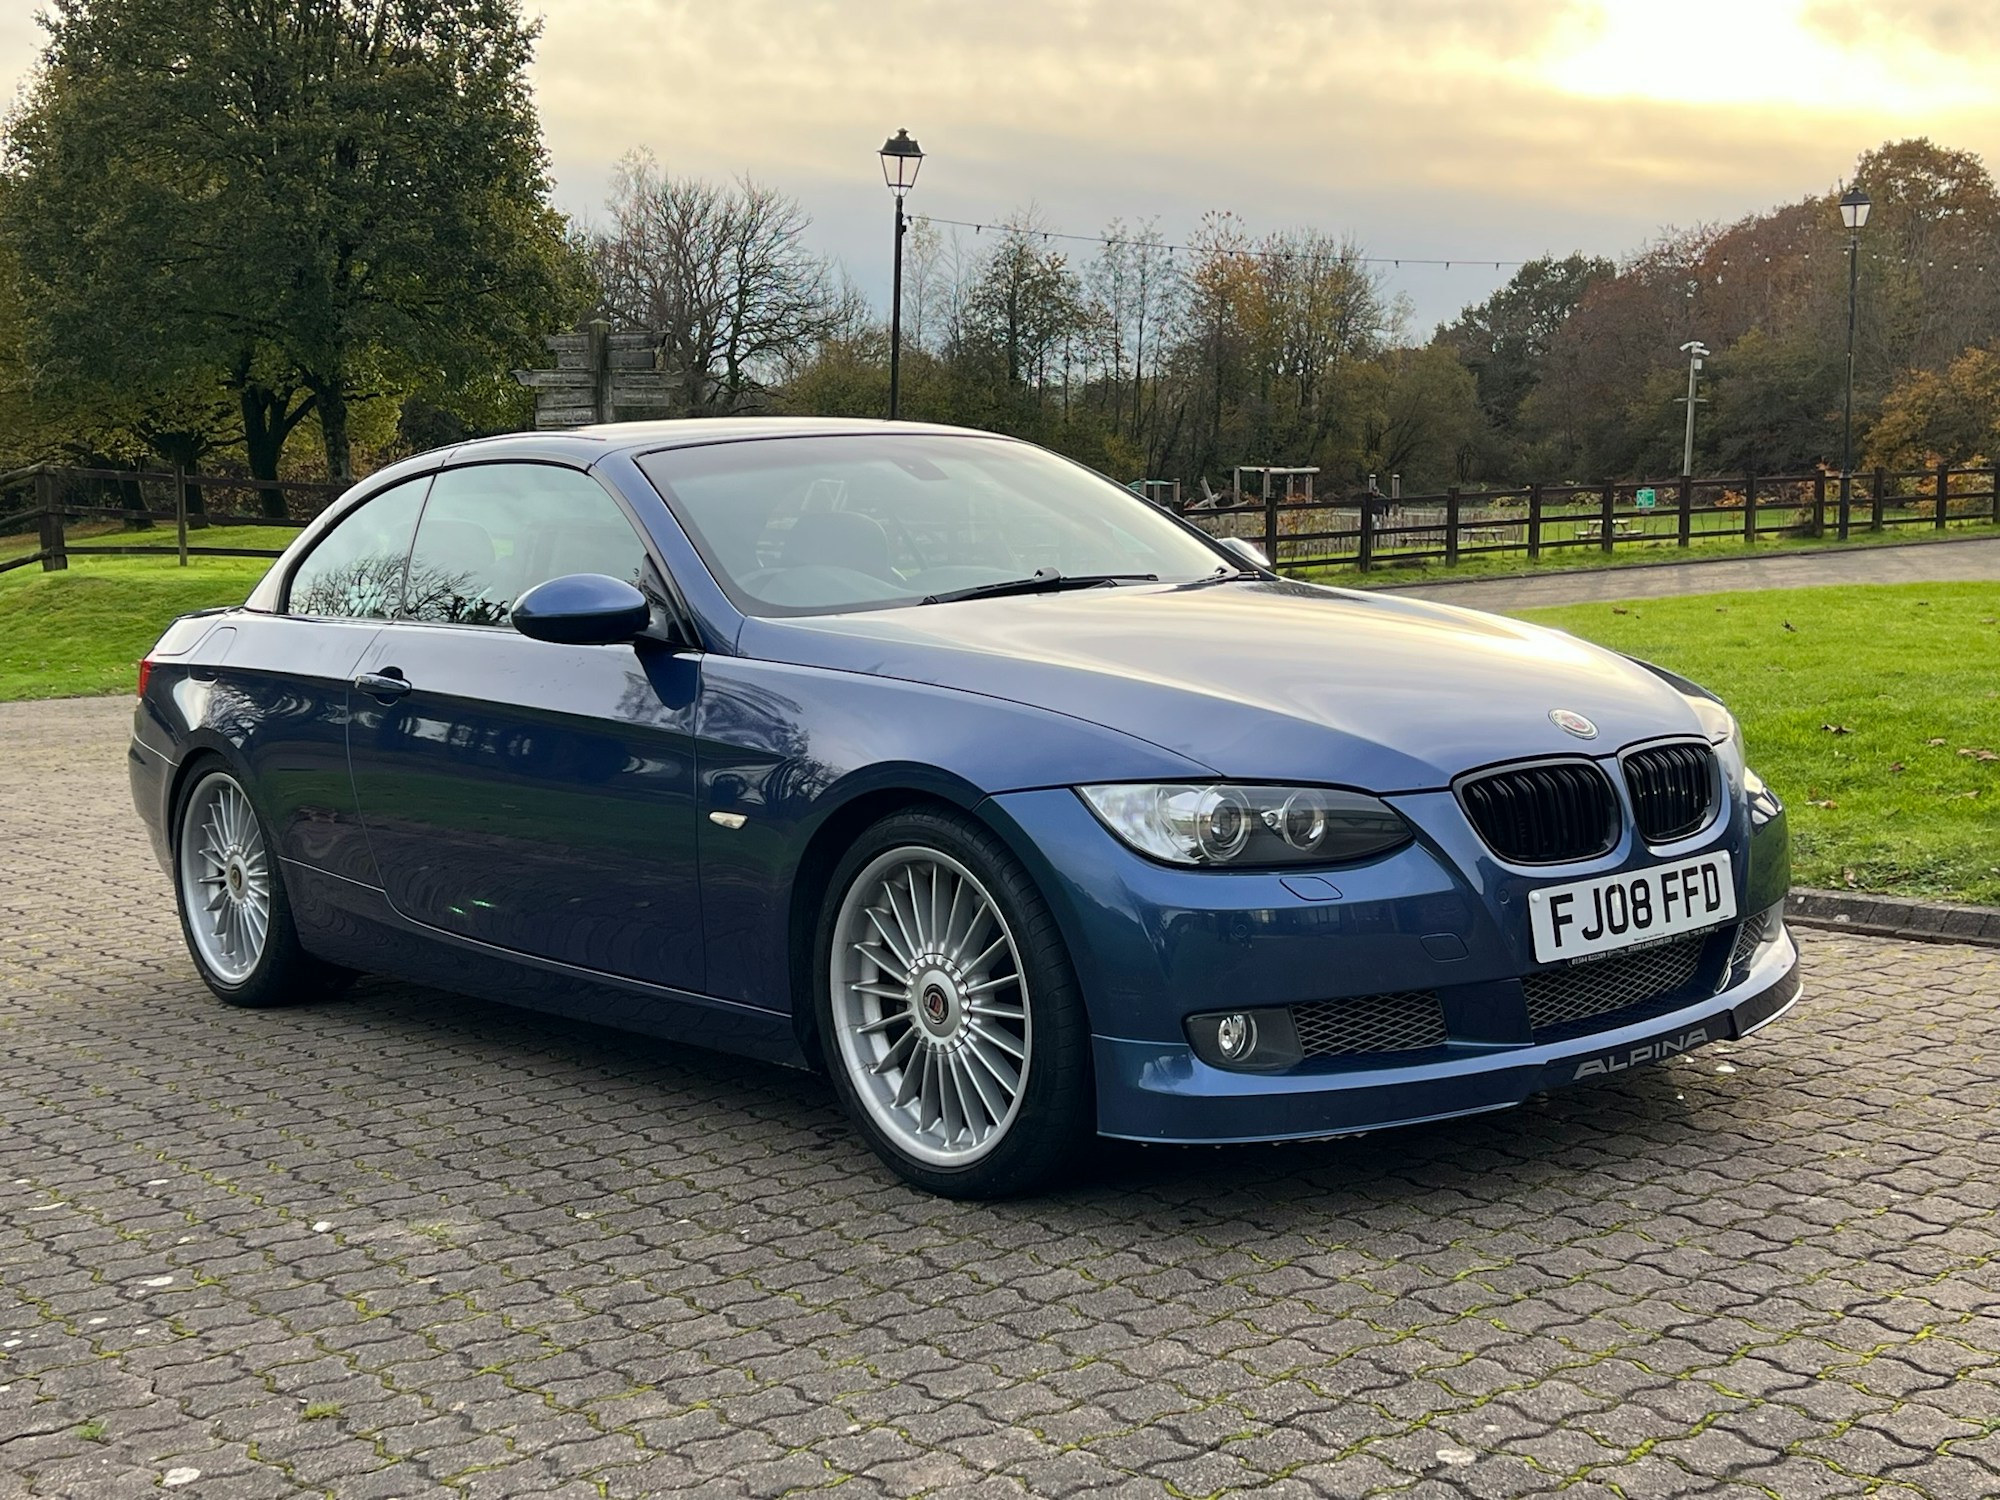 2008 BMW Alpina (E93) B3 BiTurbo Convertible for sale by classified listing  privately in Blackwood, Monmouthshire, United Kingdom